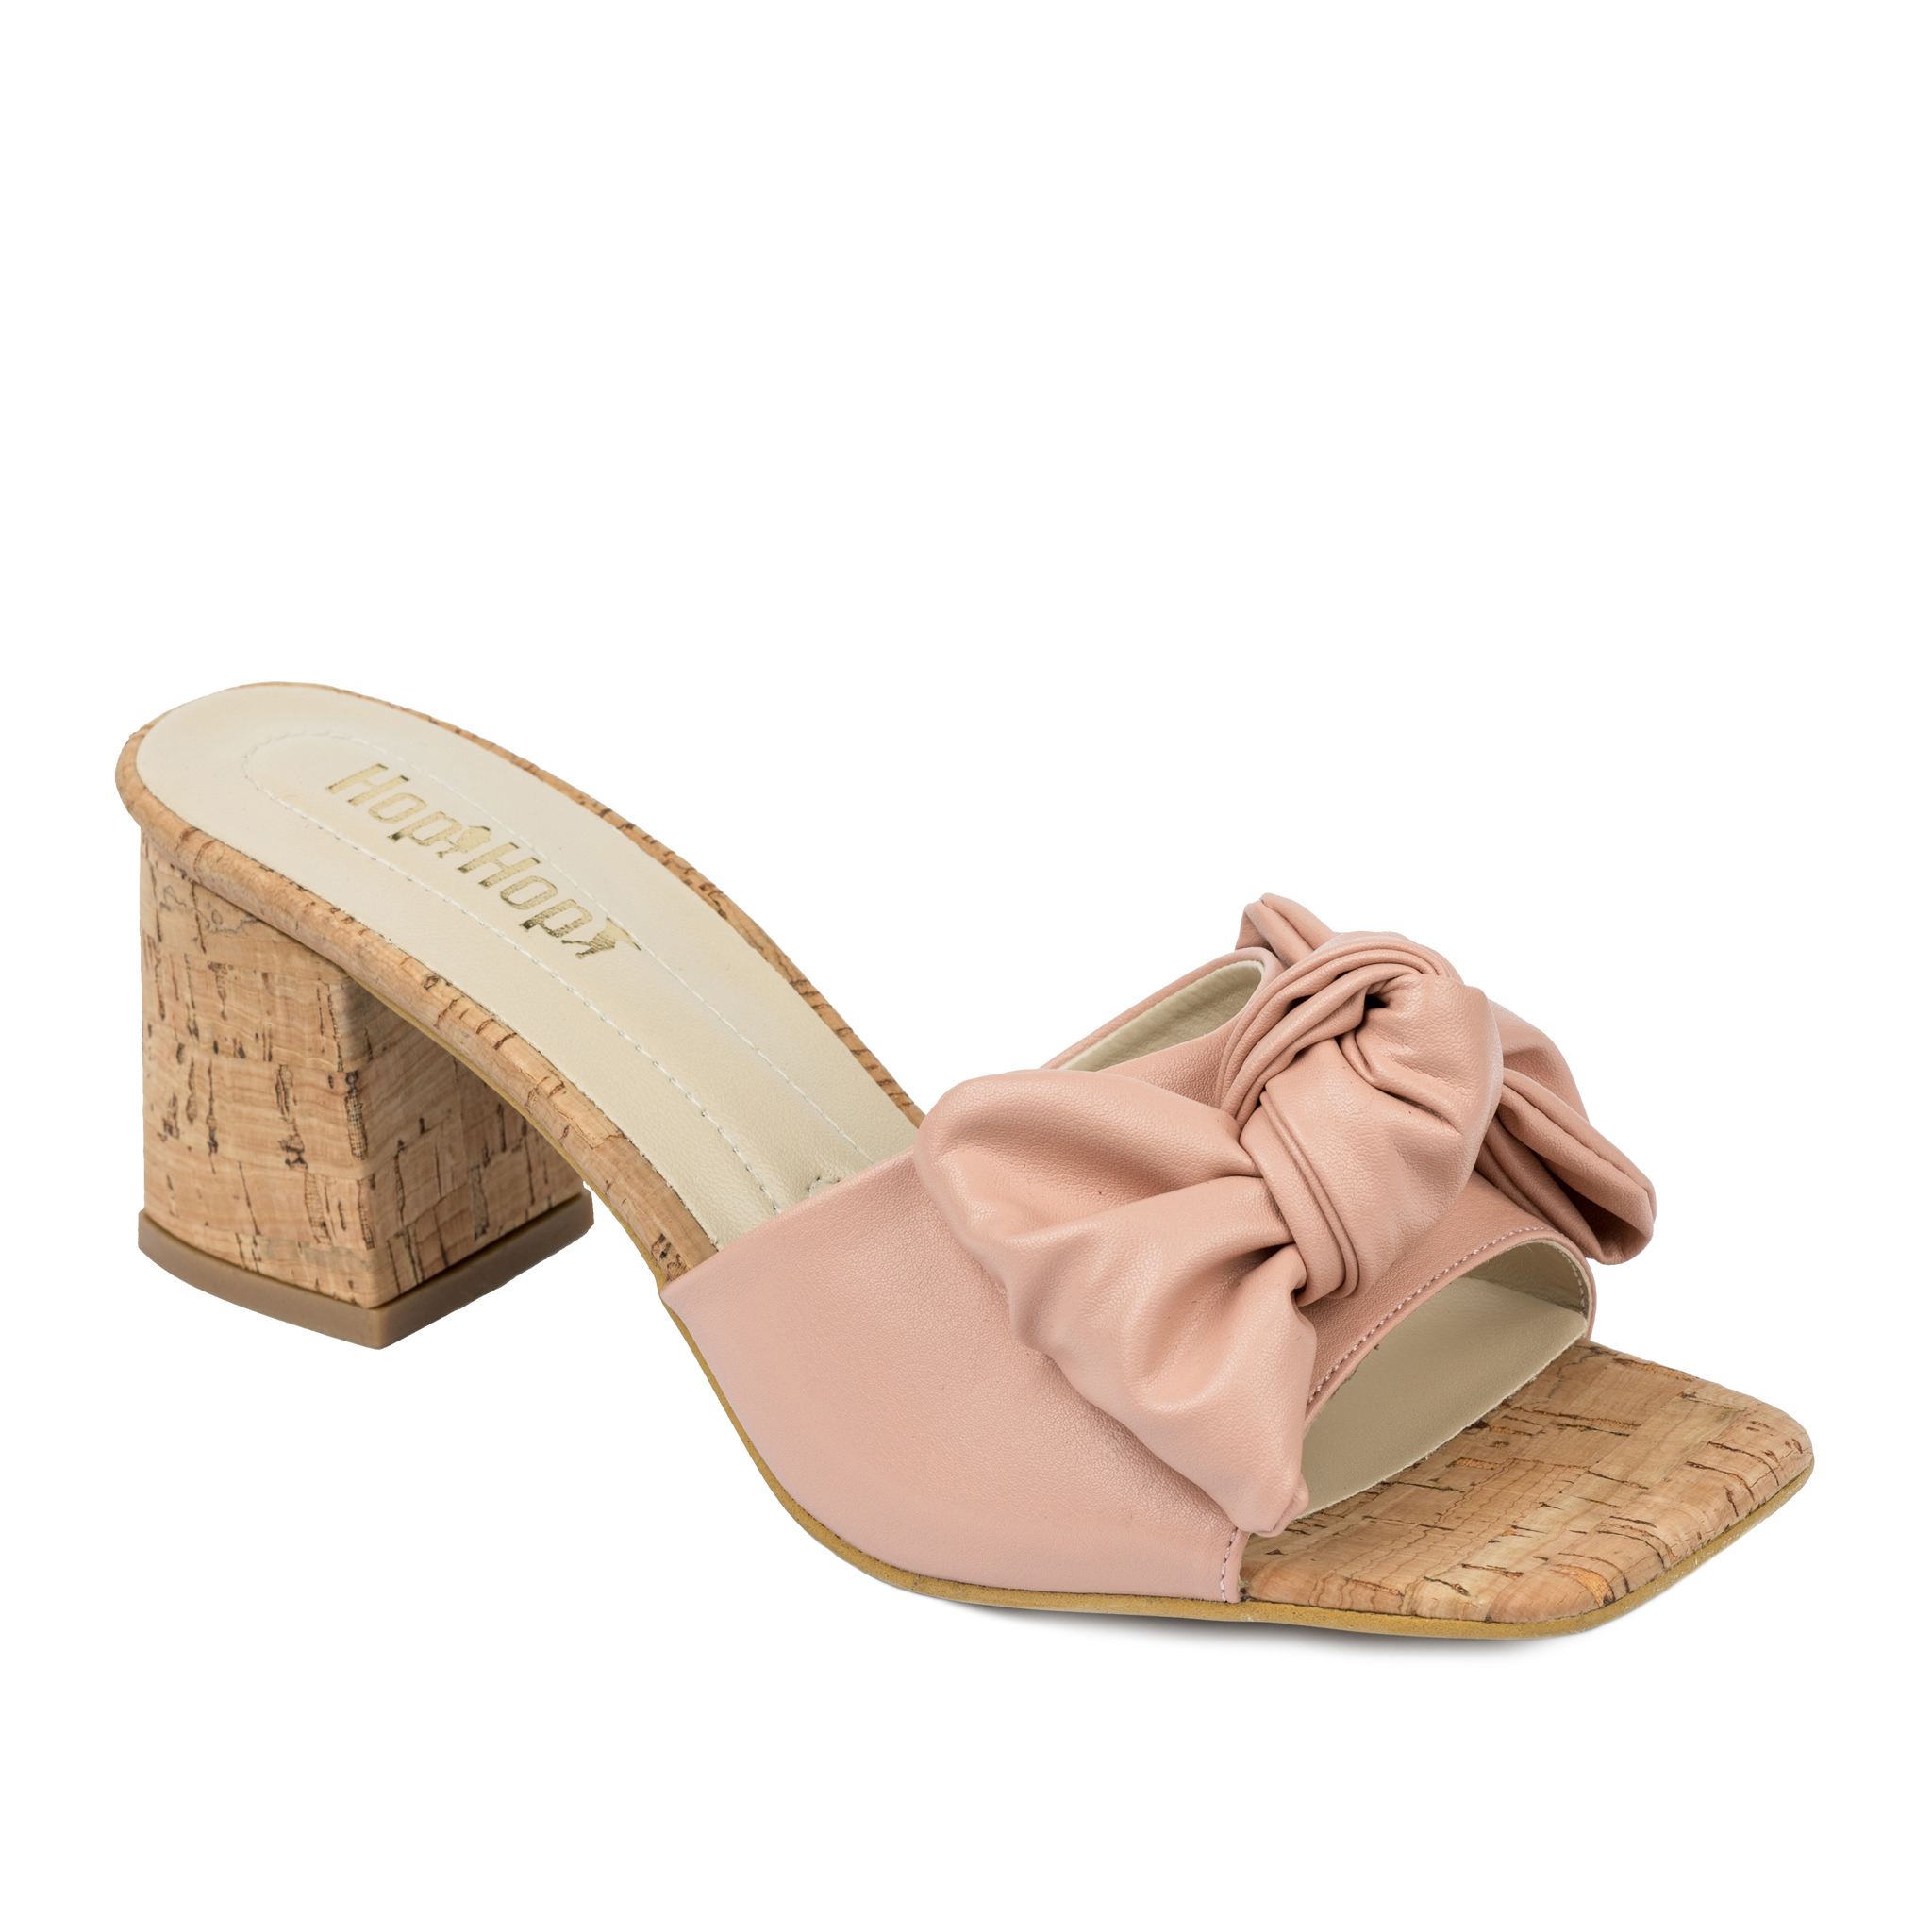 Women Slippers and Mules A170 - POWDER ROSE